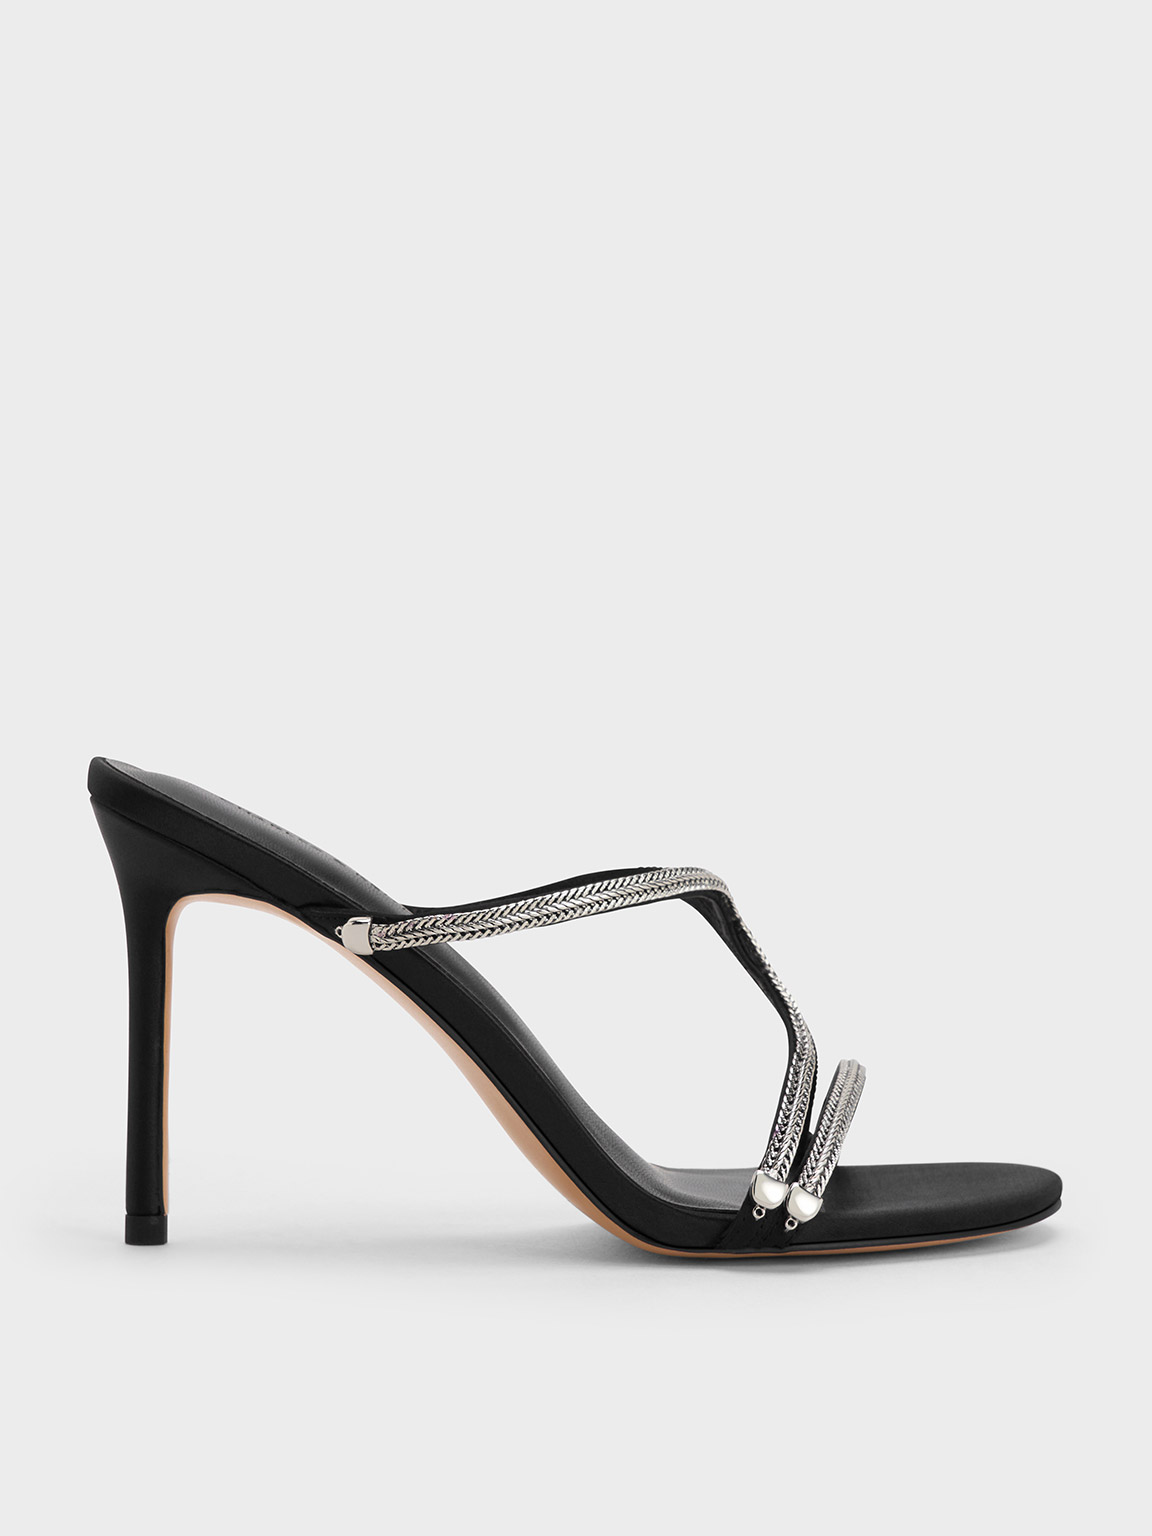 Black Textured Satin Braided Strappy Heeled Mules - CHARLES & KEITH UK